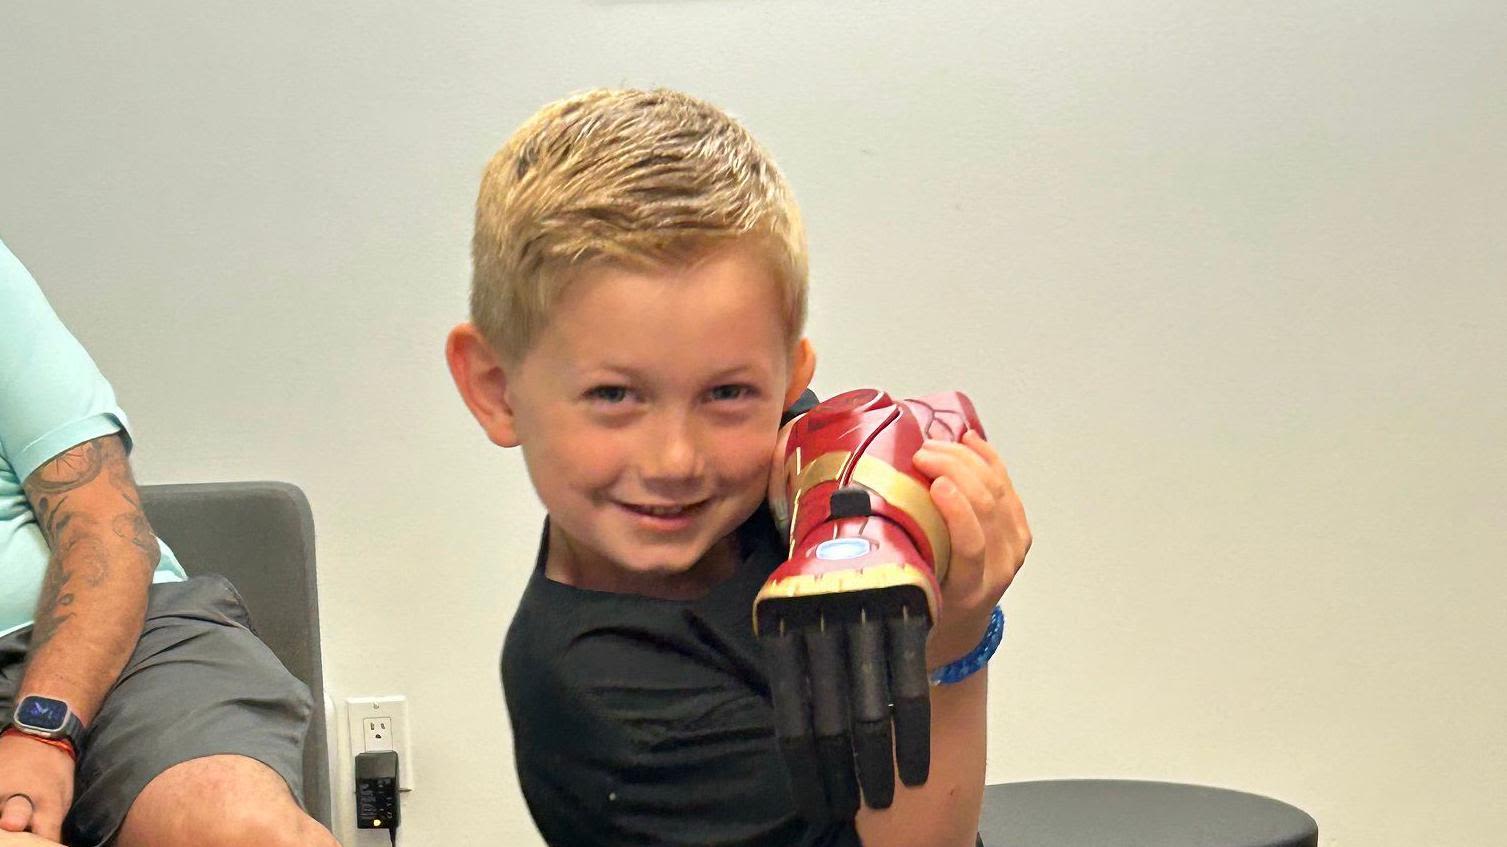 Boy, 5, is world’s youngest to use bionic hero arm